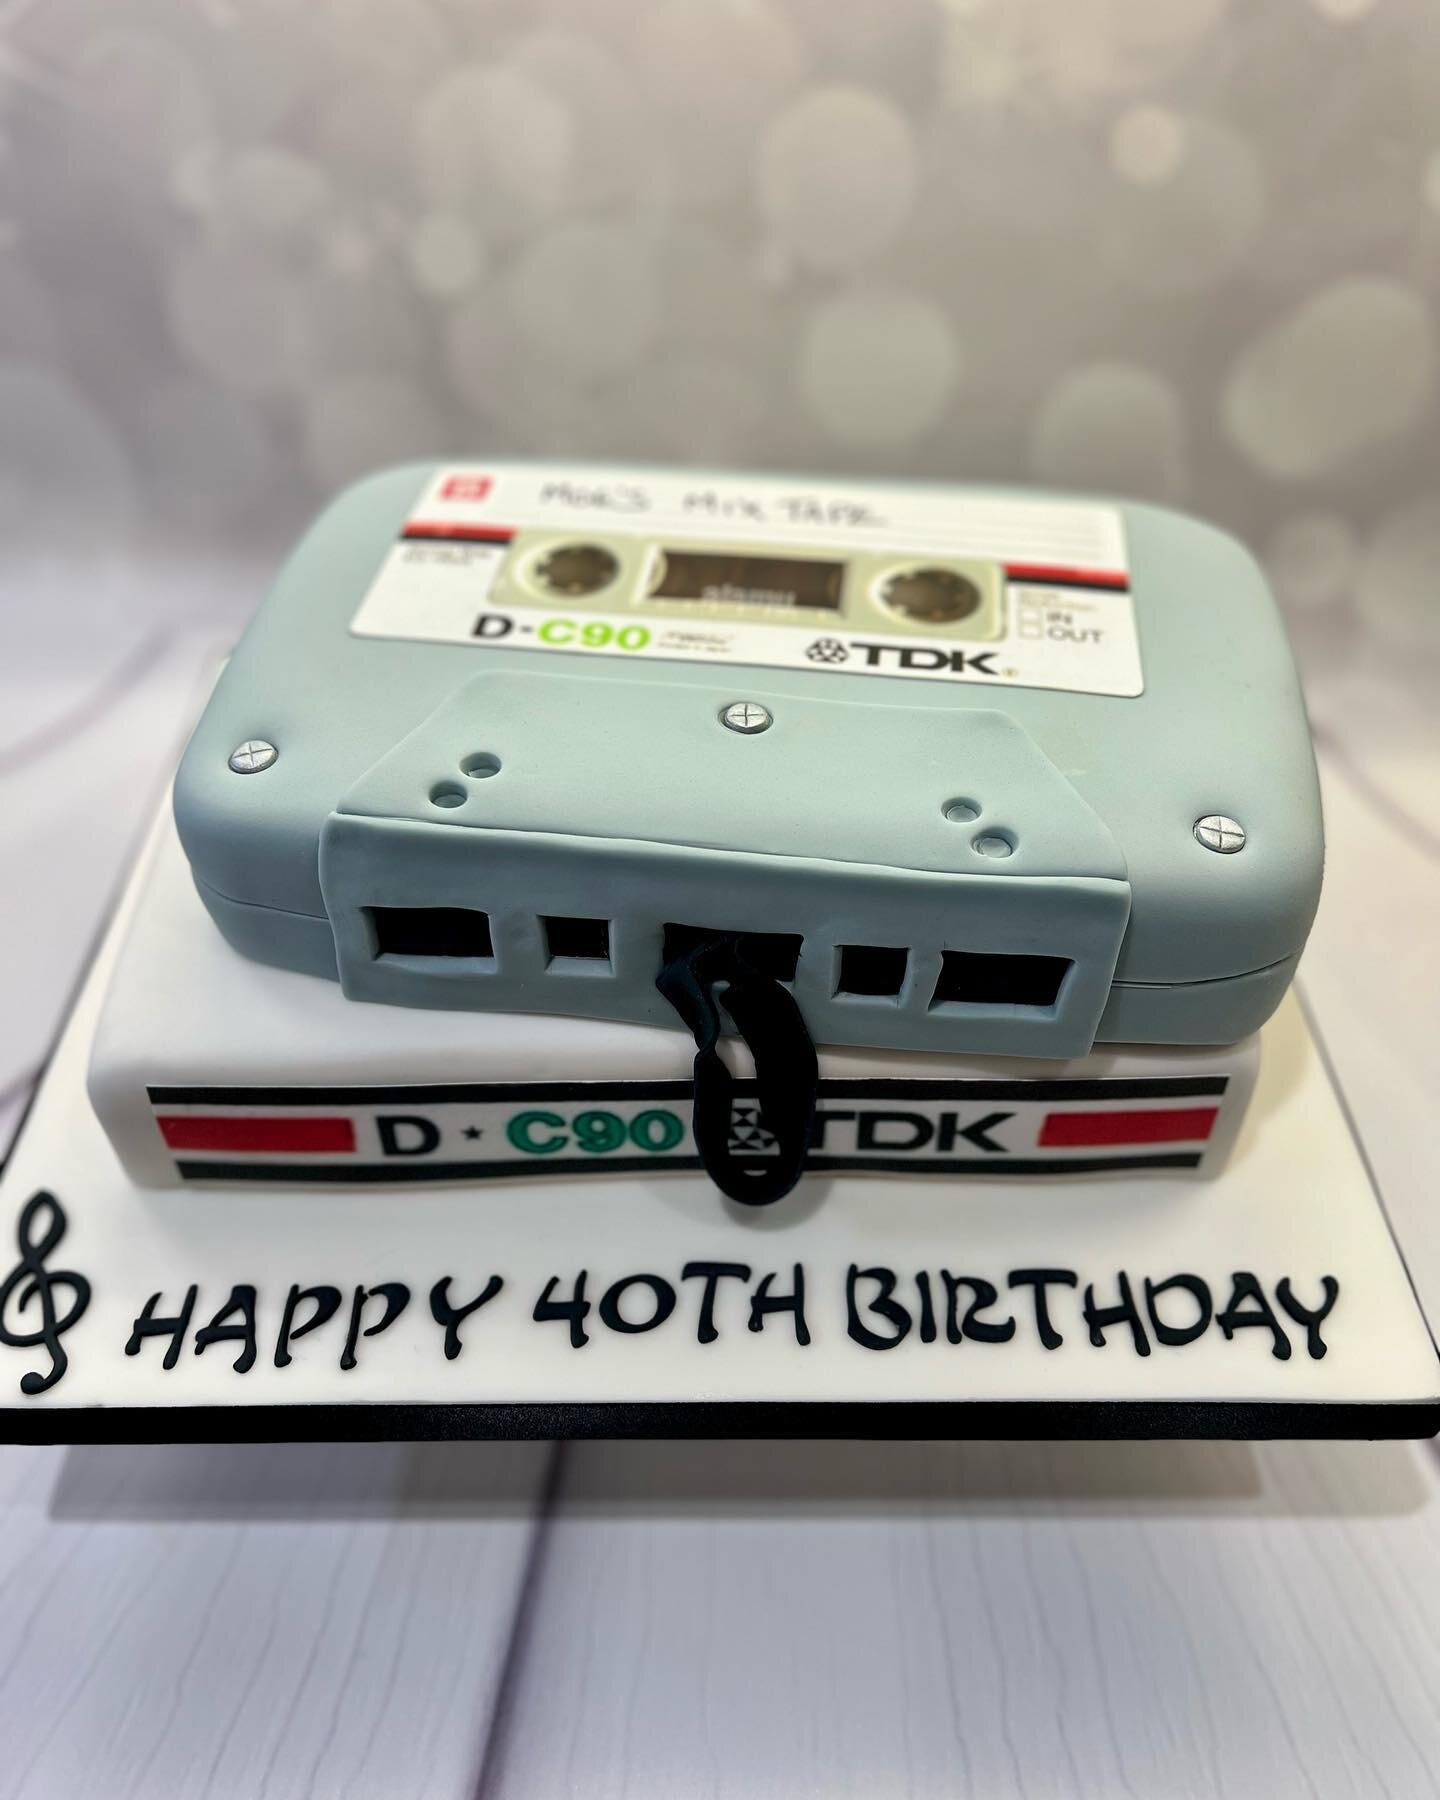 This weeks post was a chocolate sponge cassette style cake for aloe&rsquo;s 40th birthday.  Hope you had a great day x